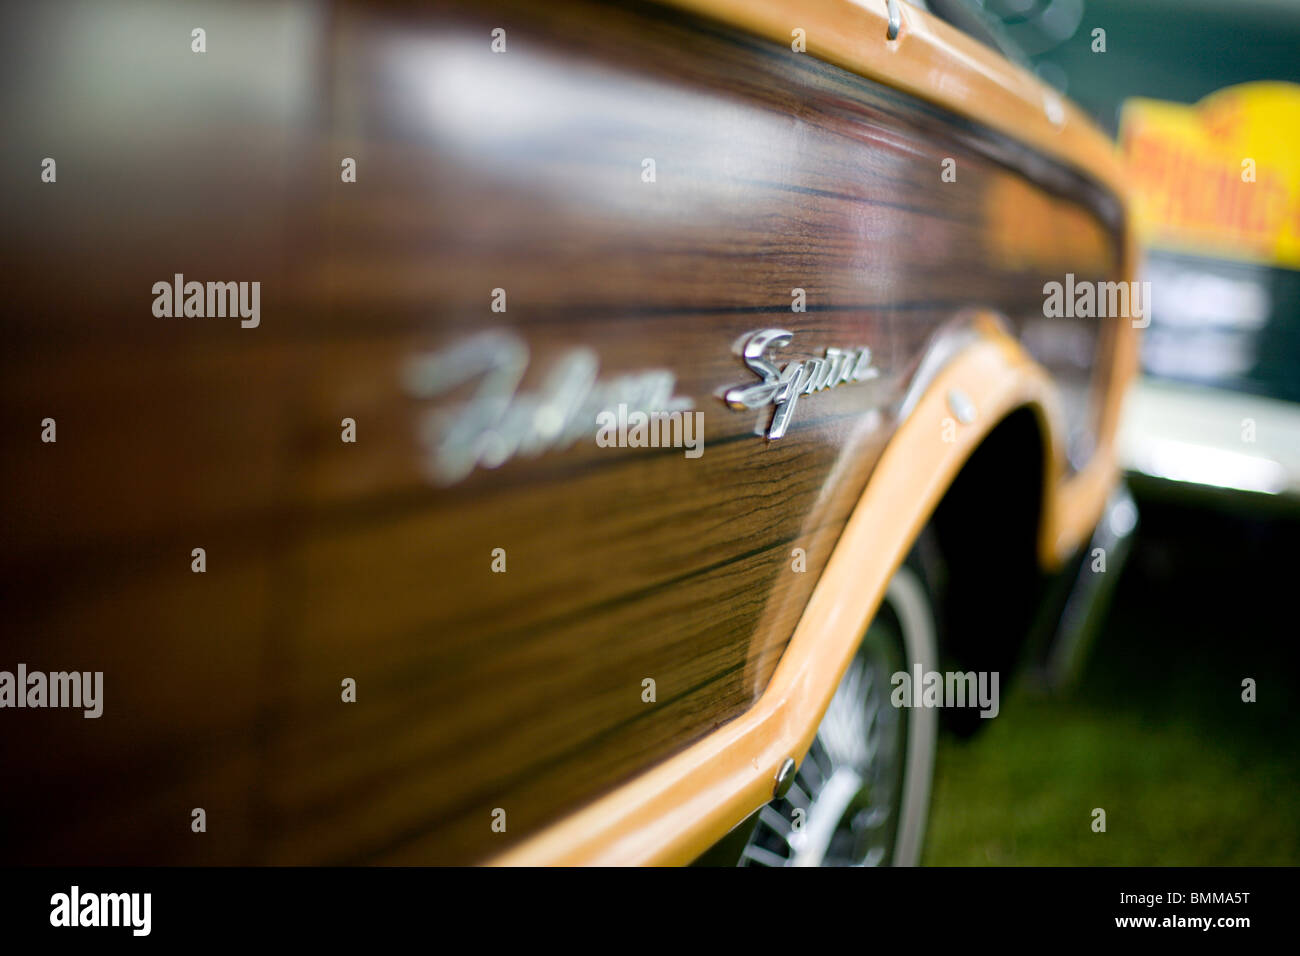 Detail of an old Station Wagon Stock Photo